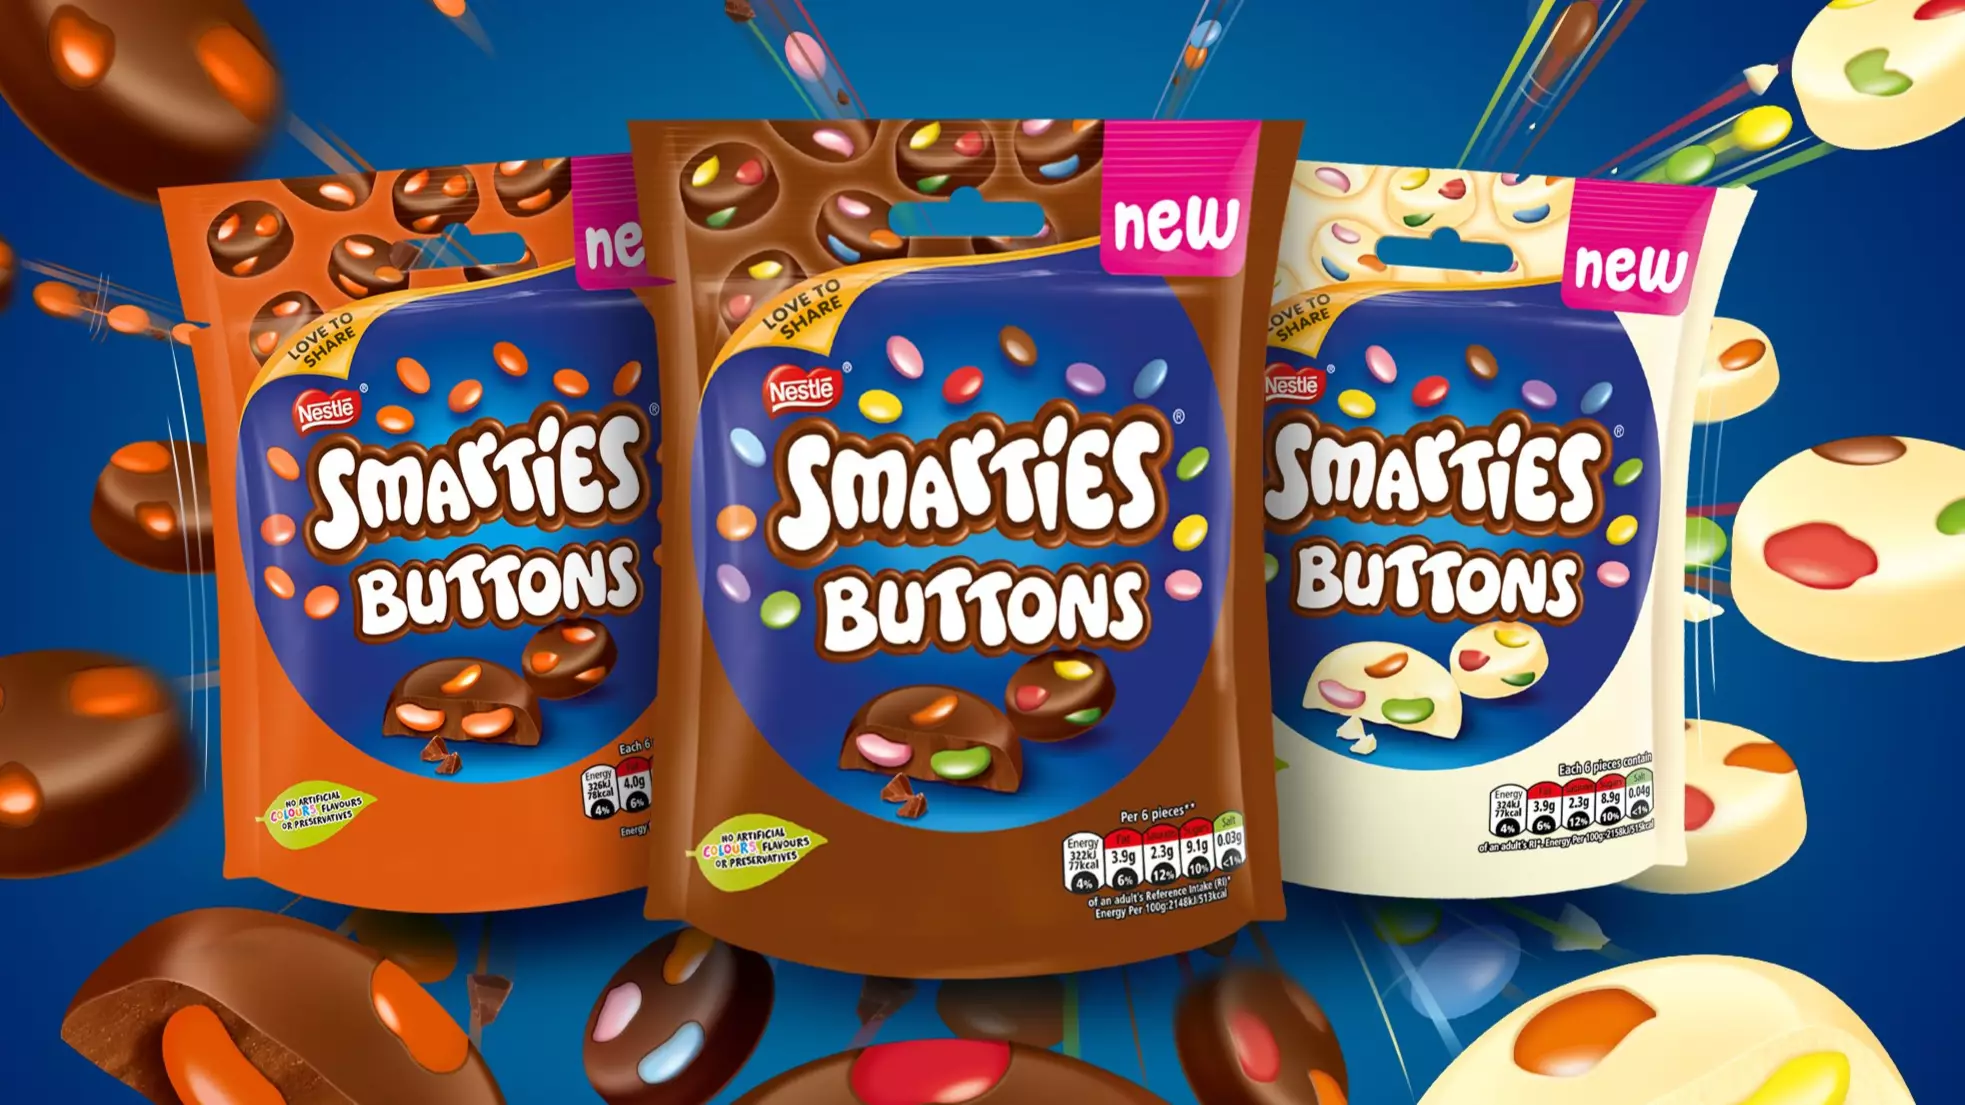 Smarties Buttons Now Exist And They’re The Snack We Never Knew We Needed